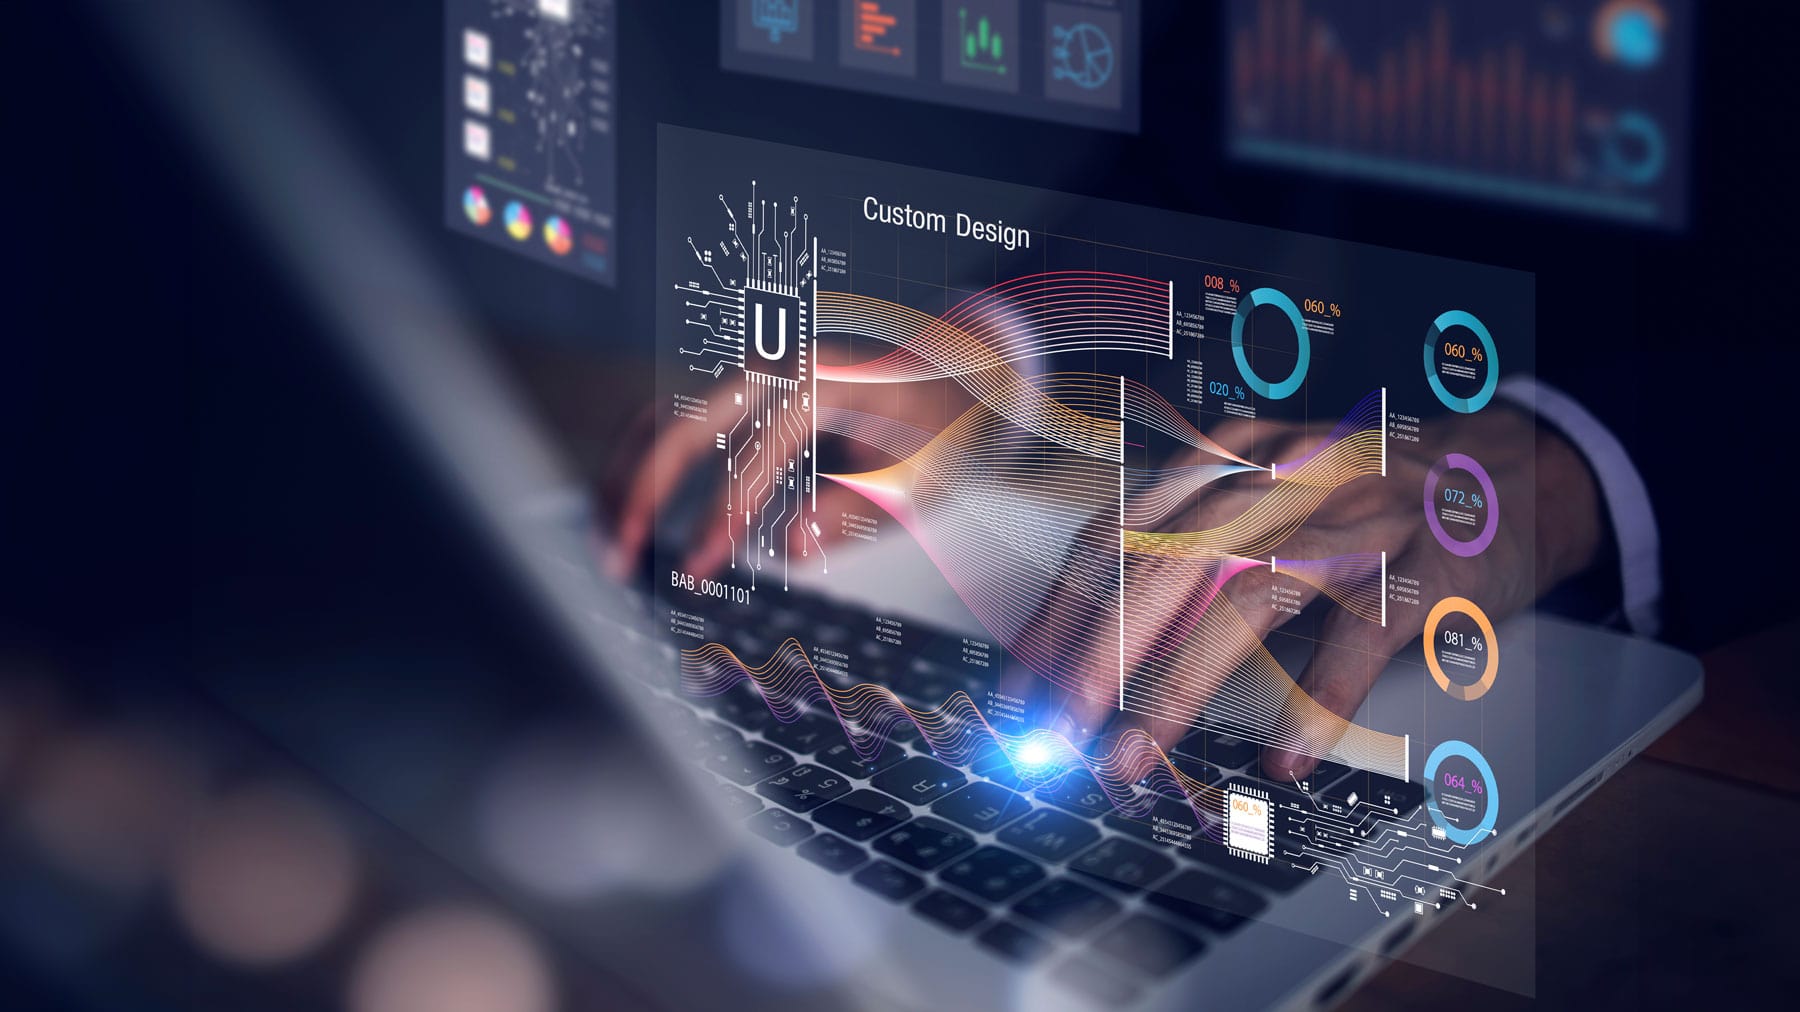 A holographic projection of Custom Website Solutions analytics and design elements floating above a laptop keyboard, depicting advanced web technology and data visualization in action.